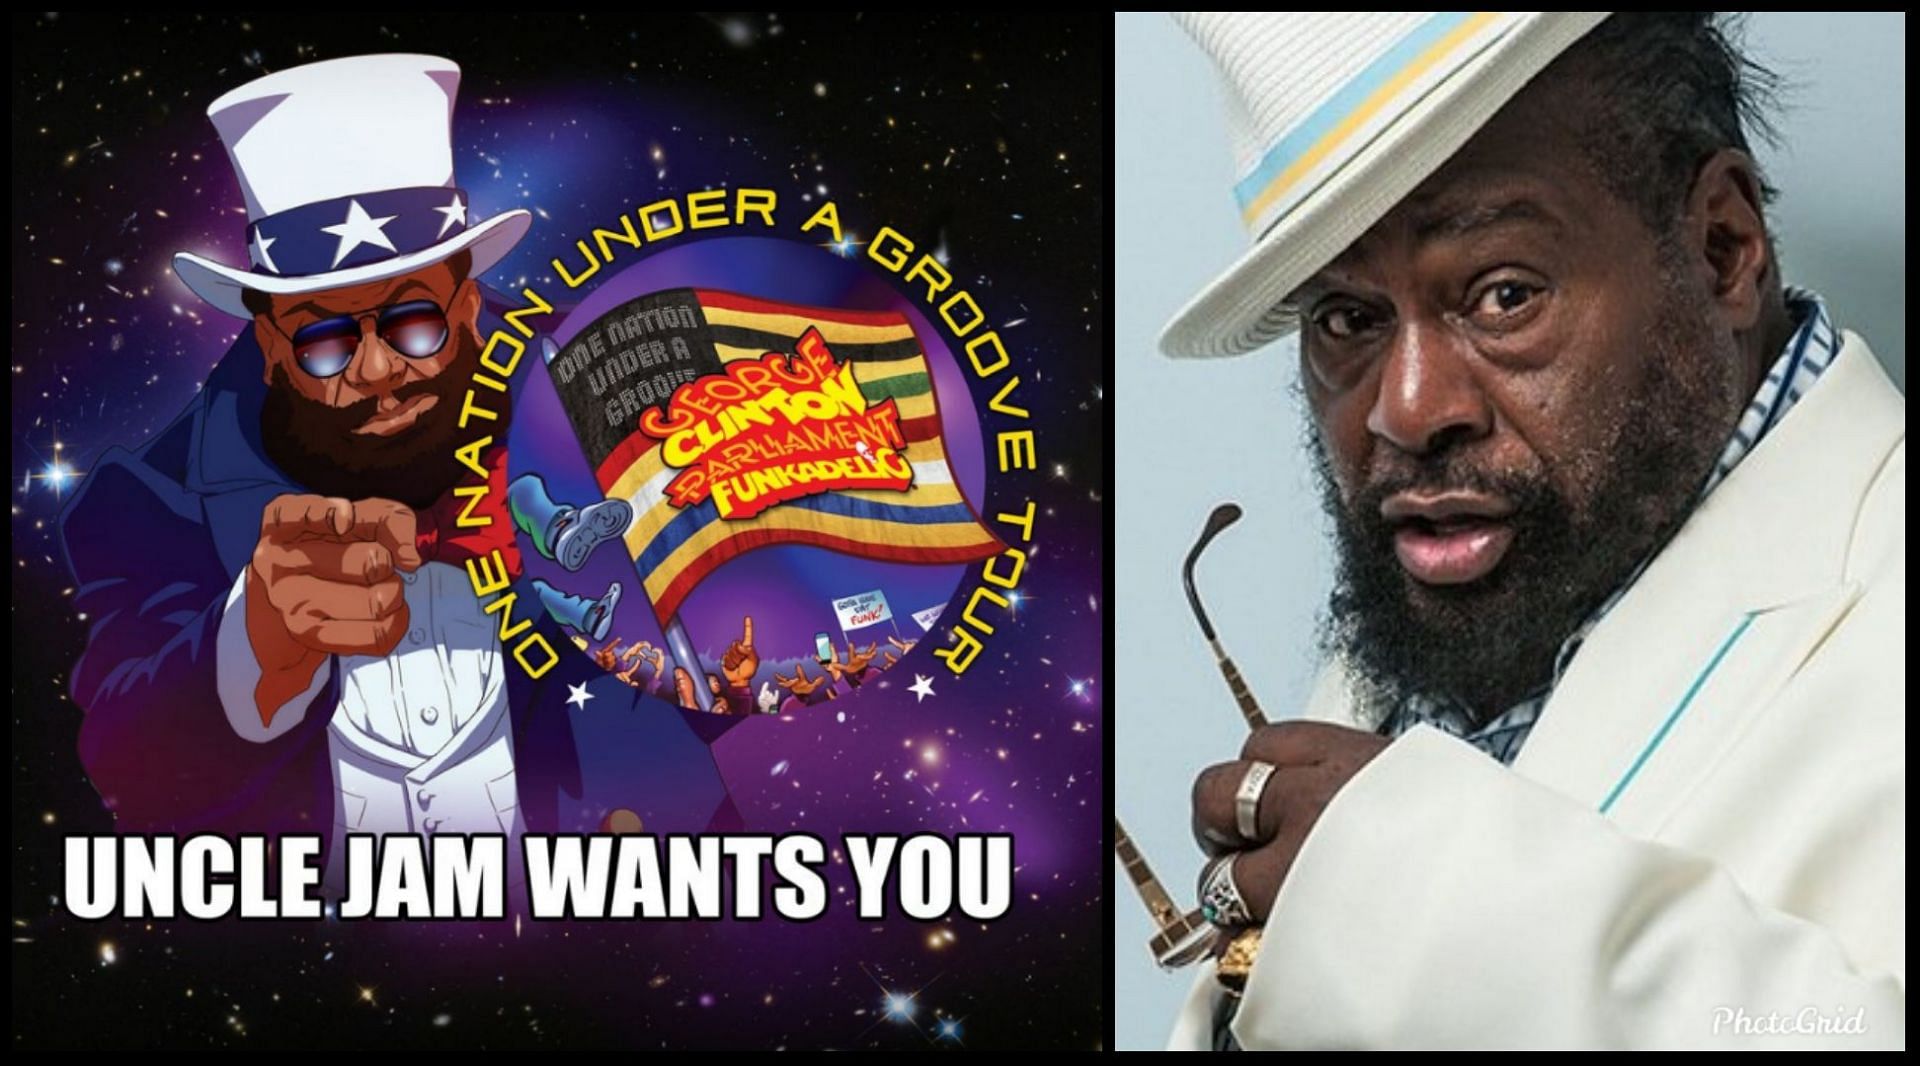 George Clinton, one of the godfathers of funk music, is all set to bring his Parliament-Funkadelic ensemble back on the road (Images via Twitter @george_clinton)